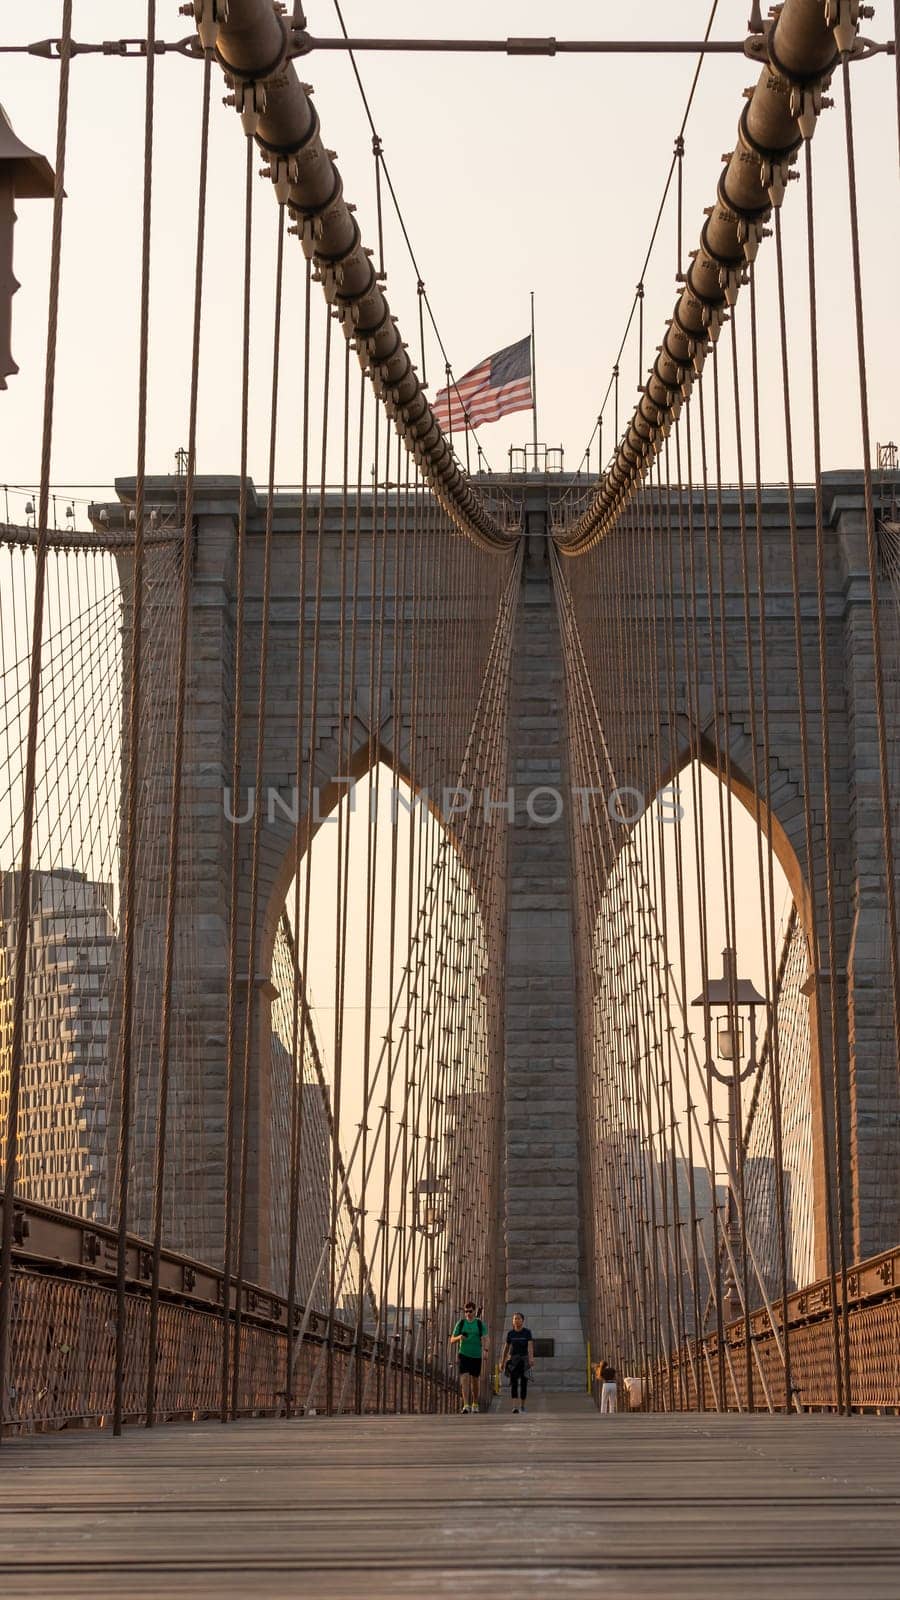 New York City, United States - September 18, 2022. People walk under the arch of the Brooklyn